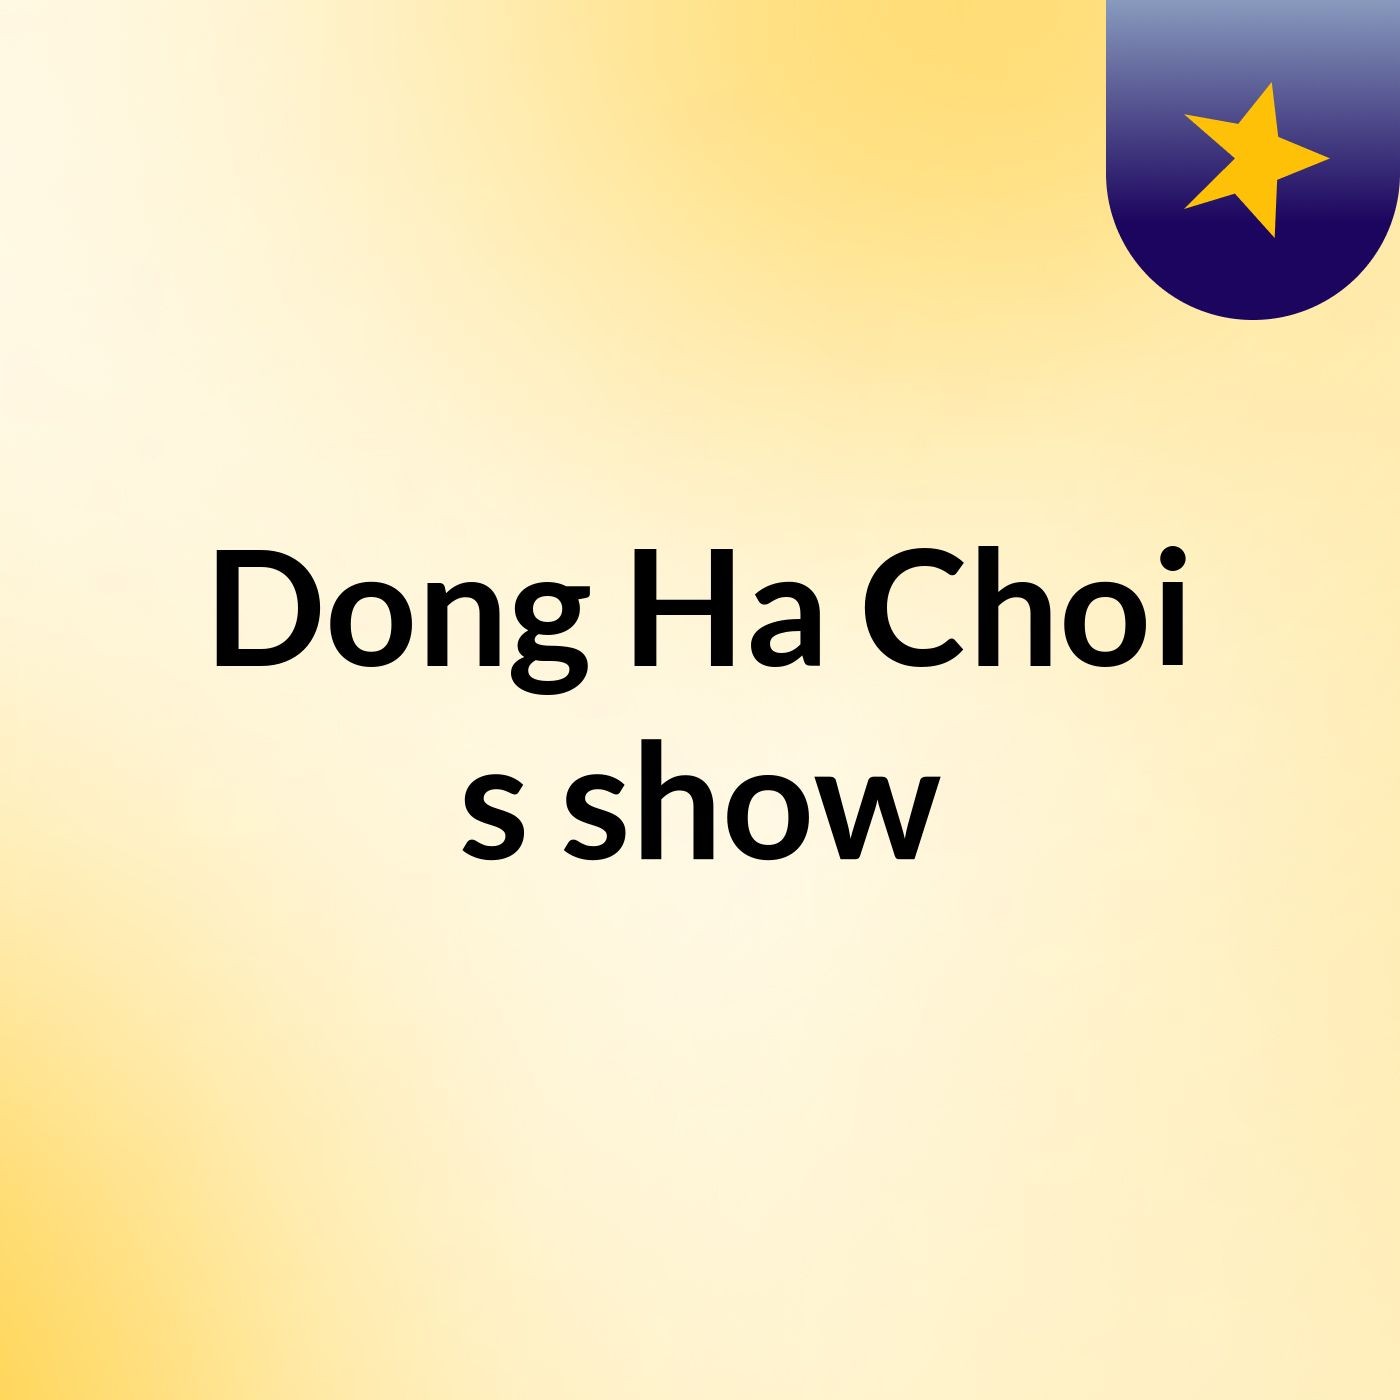 Dong Ha Choi's show